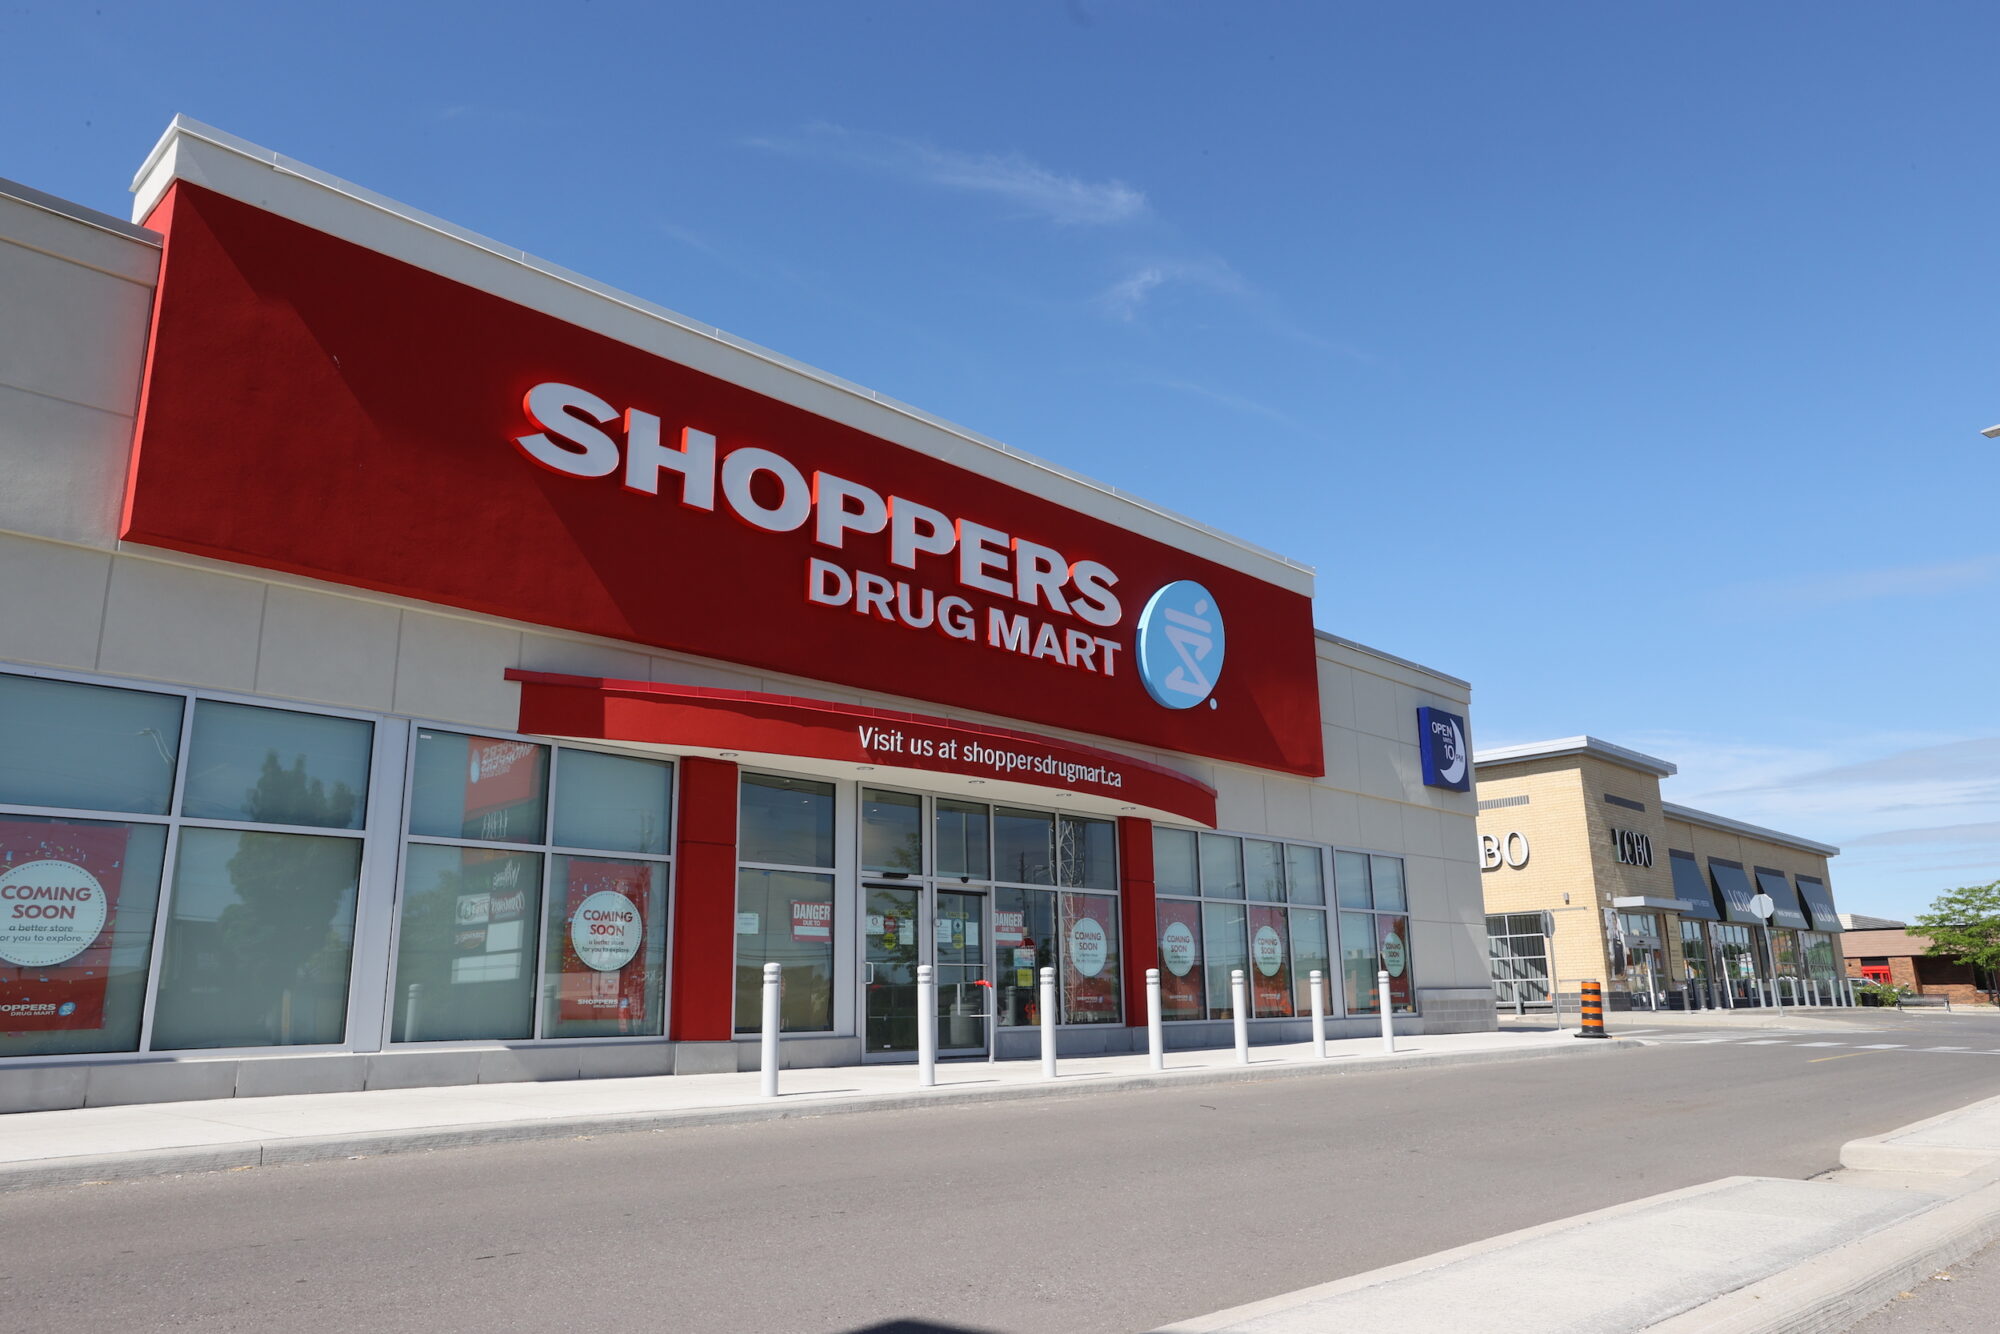 Exterior view of Shoppers Drug Mark